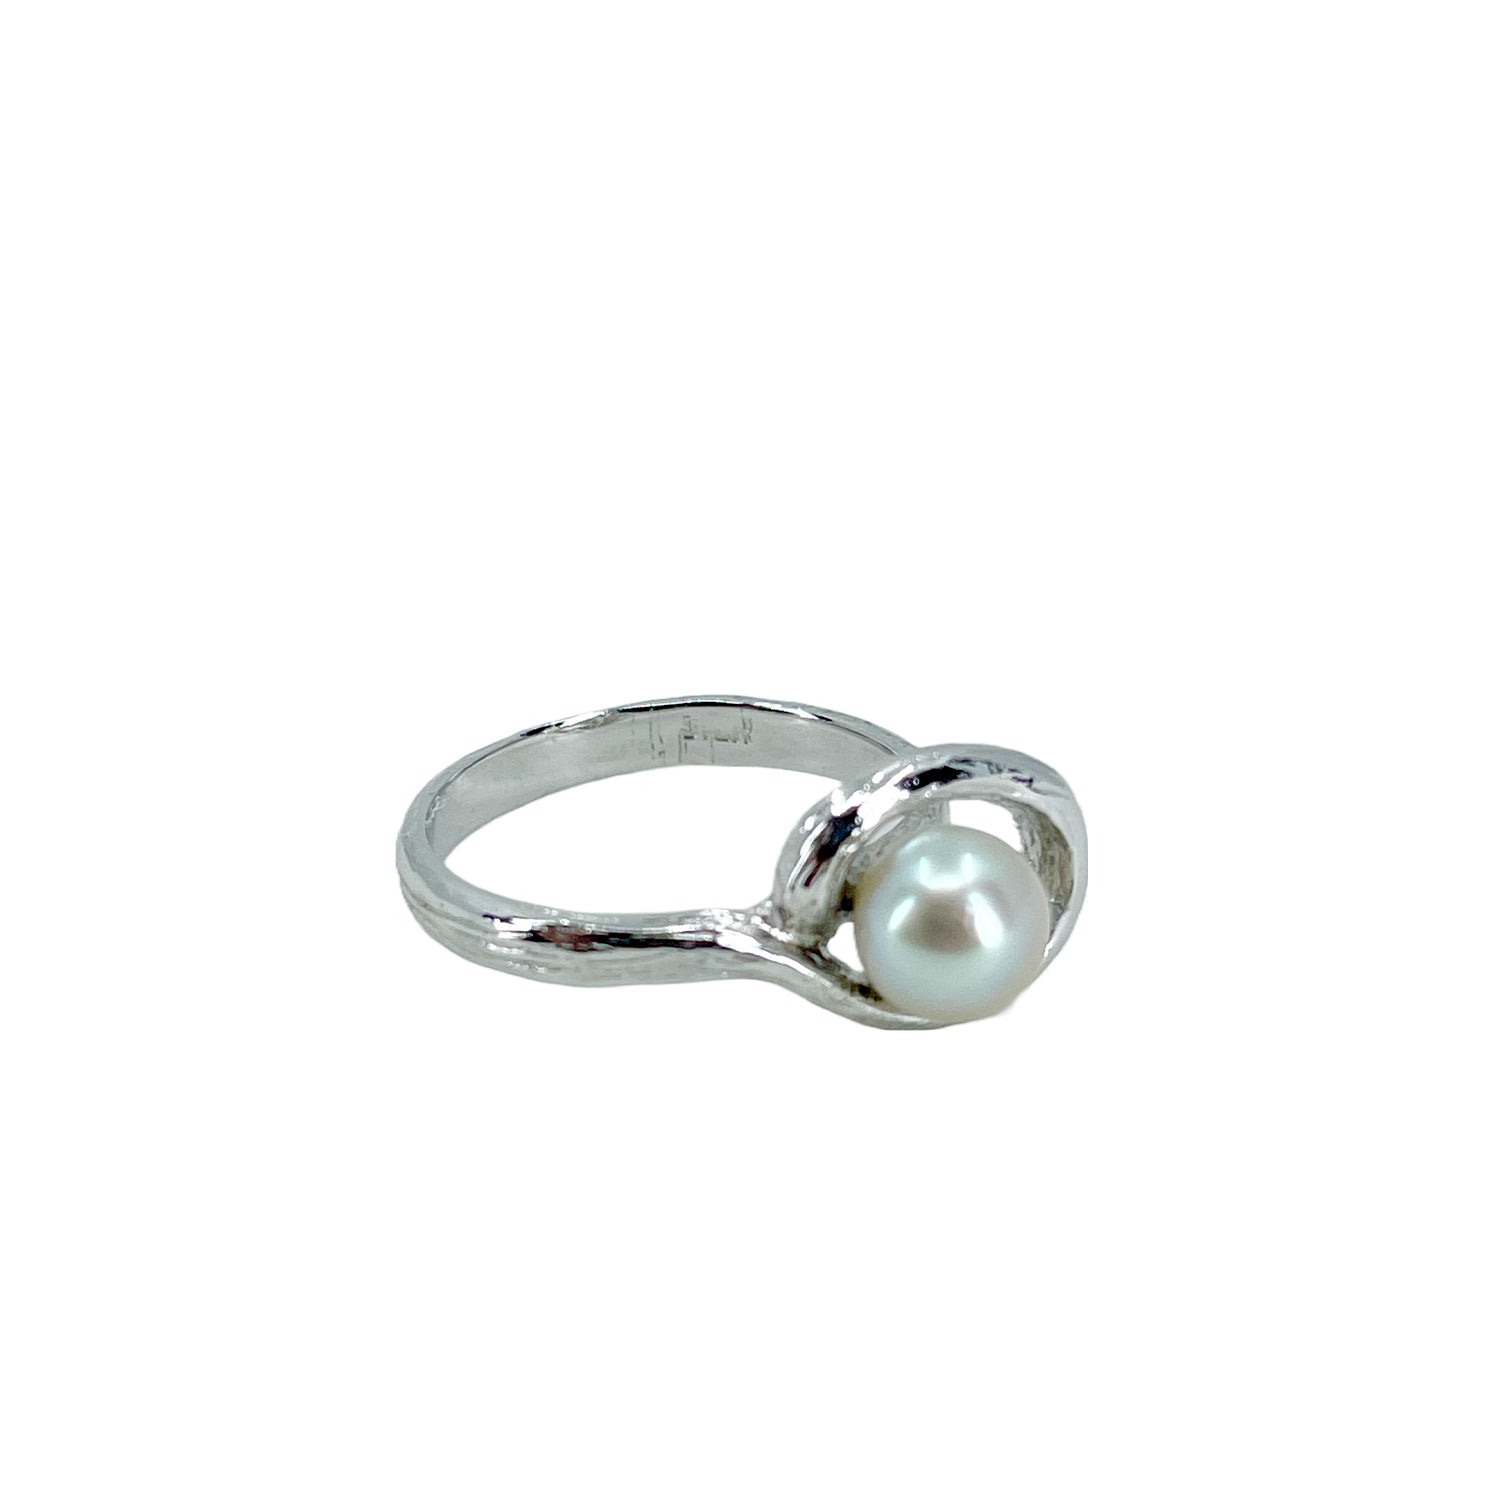 Abstract Modernist Japanese Saltwater Blue Akoya Cultured Pearl Ring- Sterling Silver Sz 7 1/2